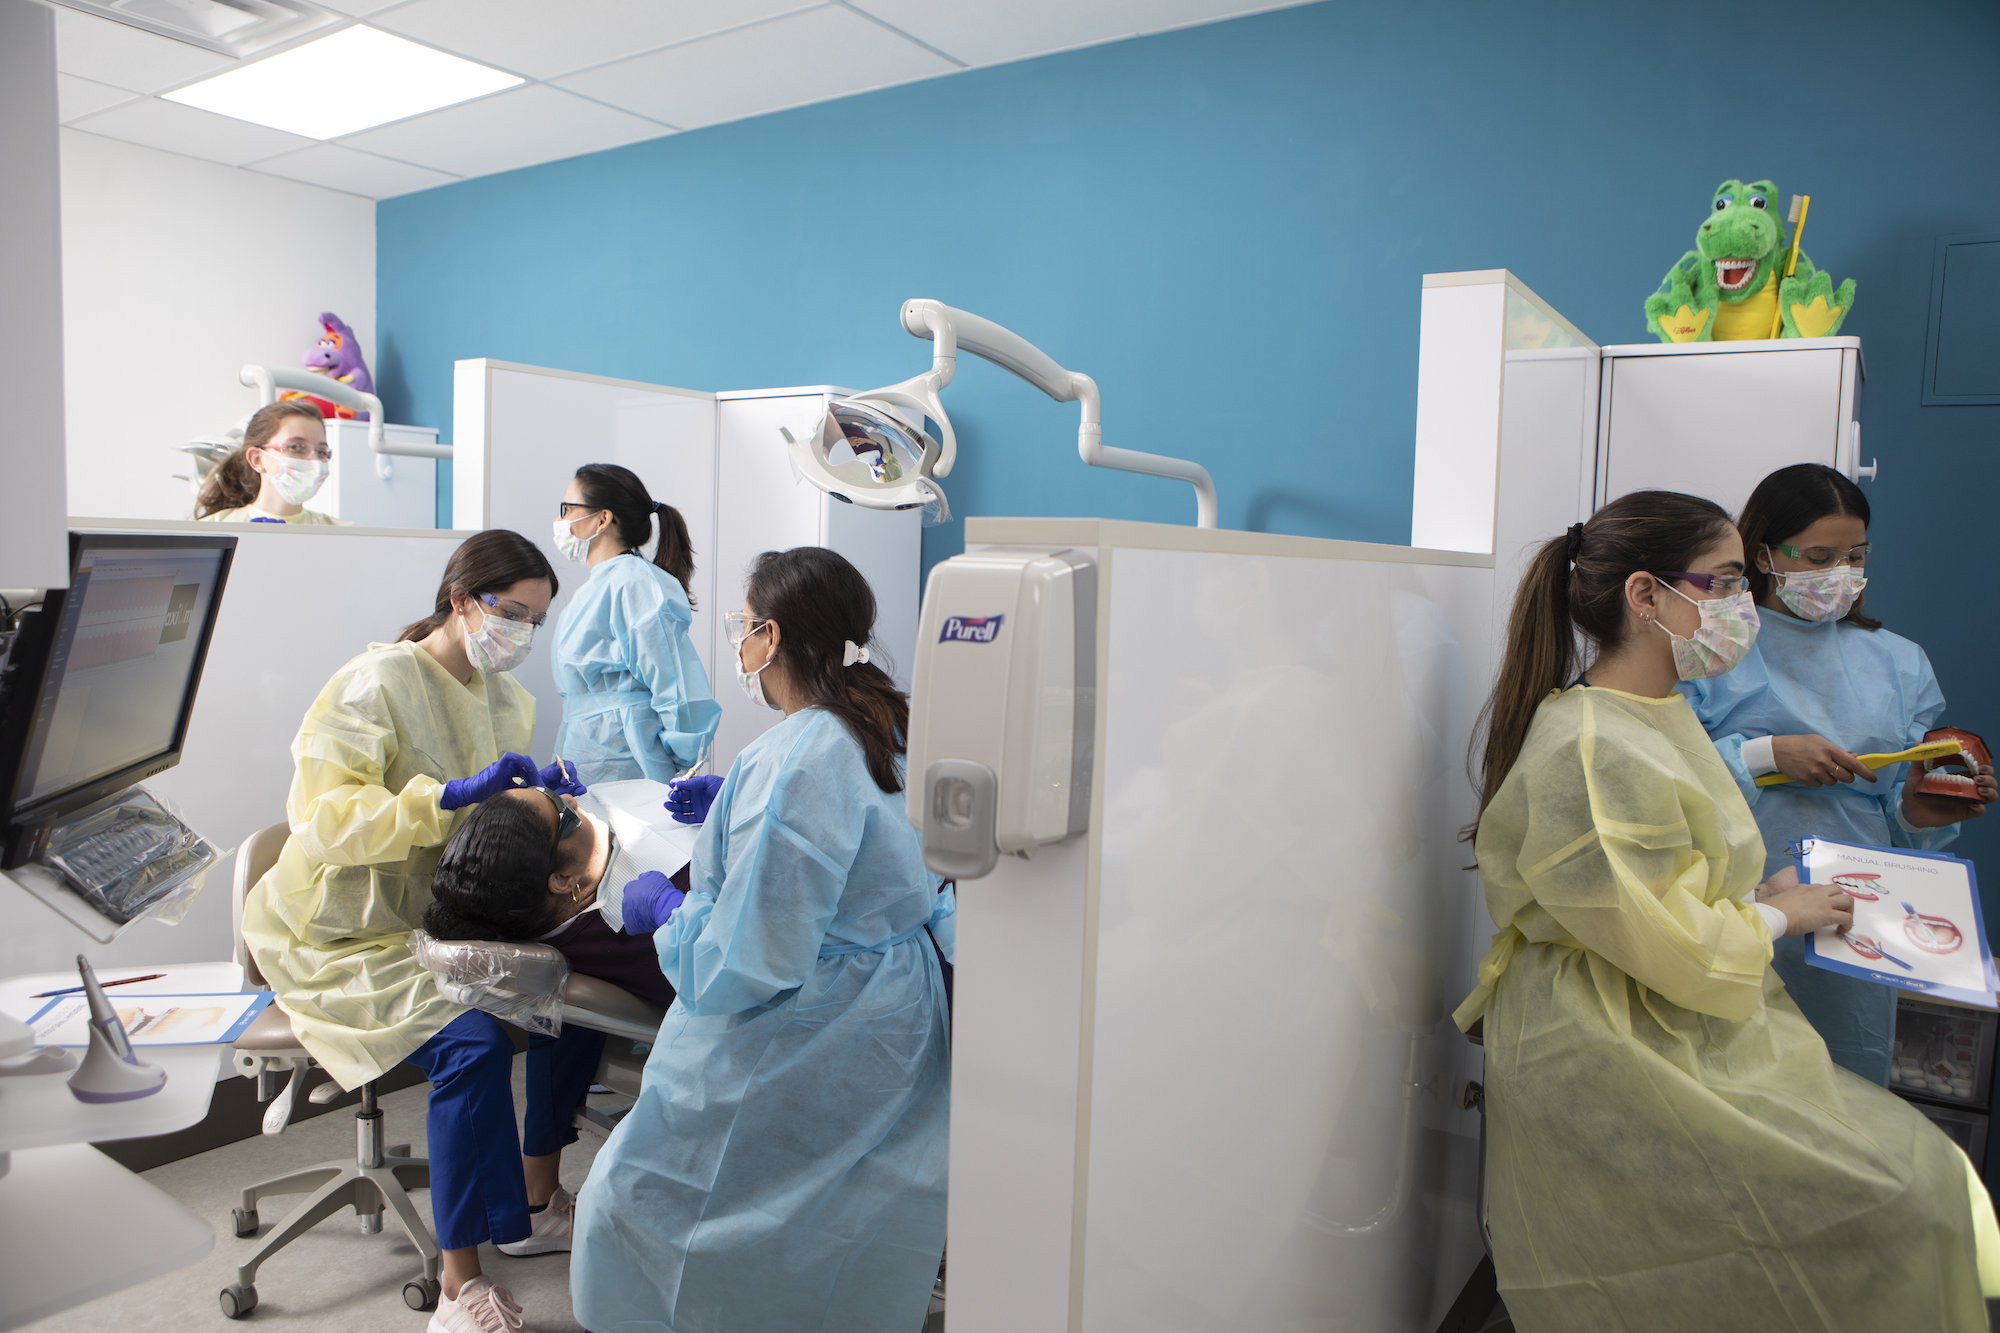 Dental professionals care for and educate patients in chairs while wearing gowns, masks, and gloves